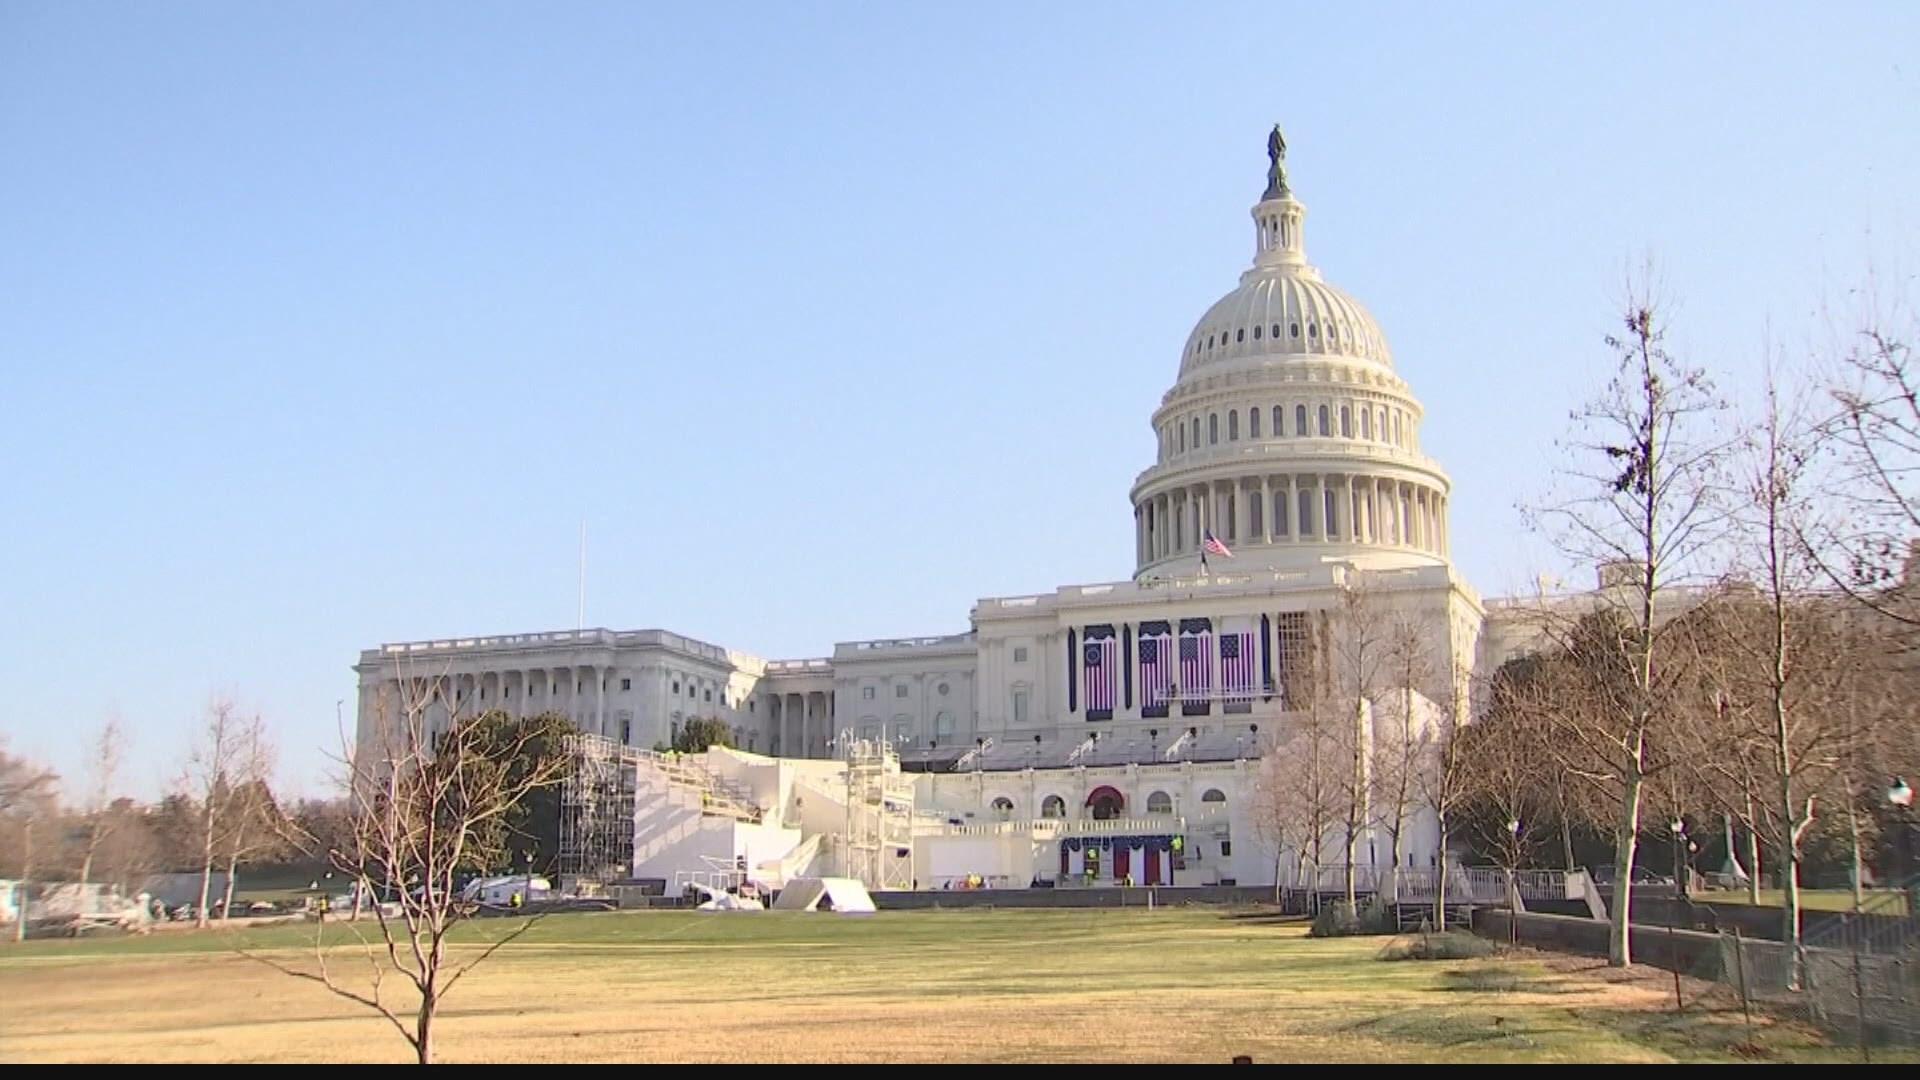 The FBI is keeping close tabs on potential security threats leading up to Inauguration Day after what happened at the Capitol last week.